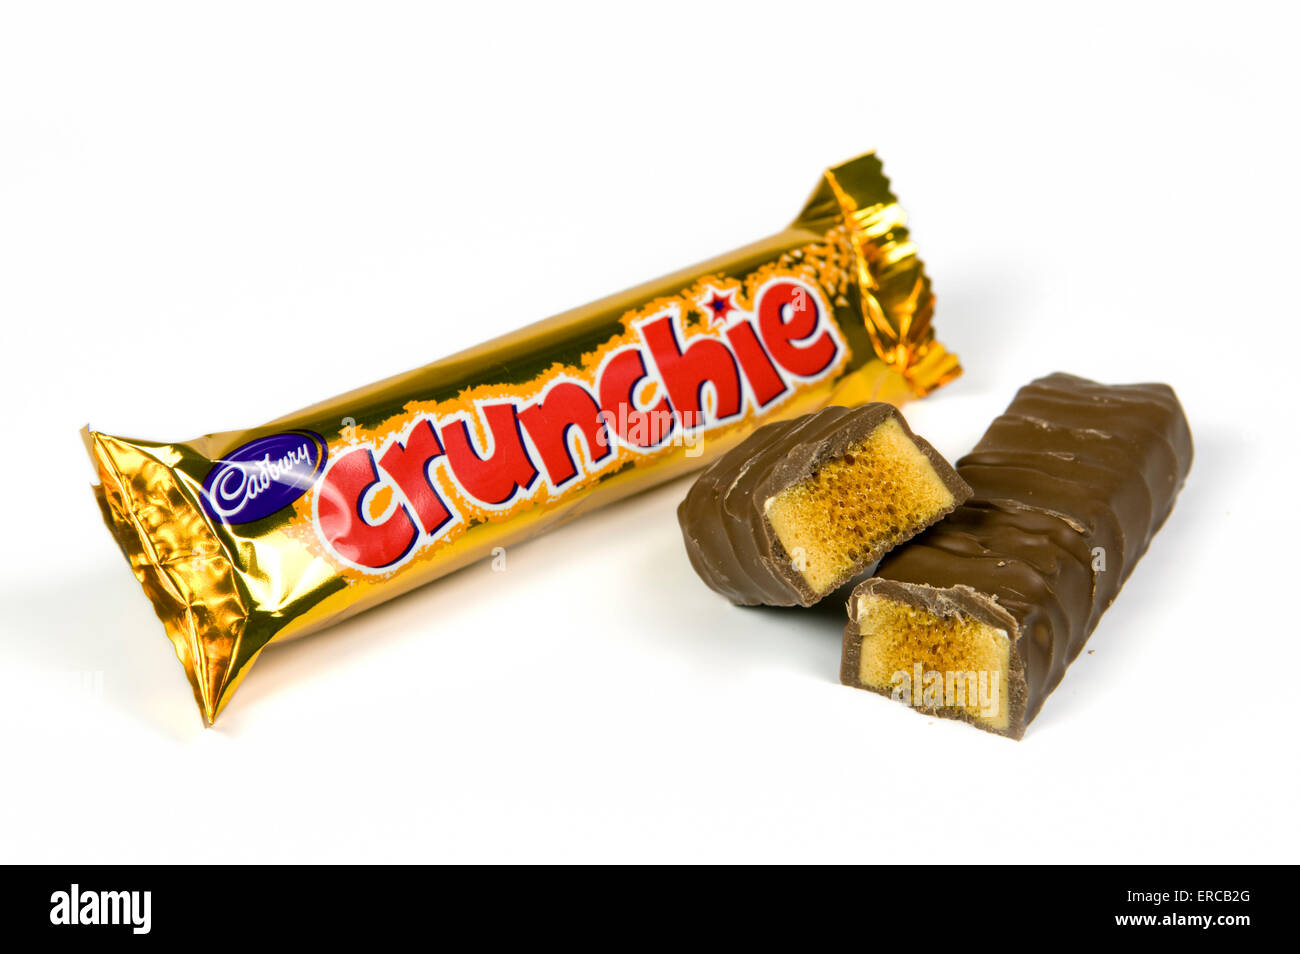 Crunchie bar on white background with open cut up bar by the side Stock Photo